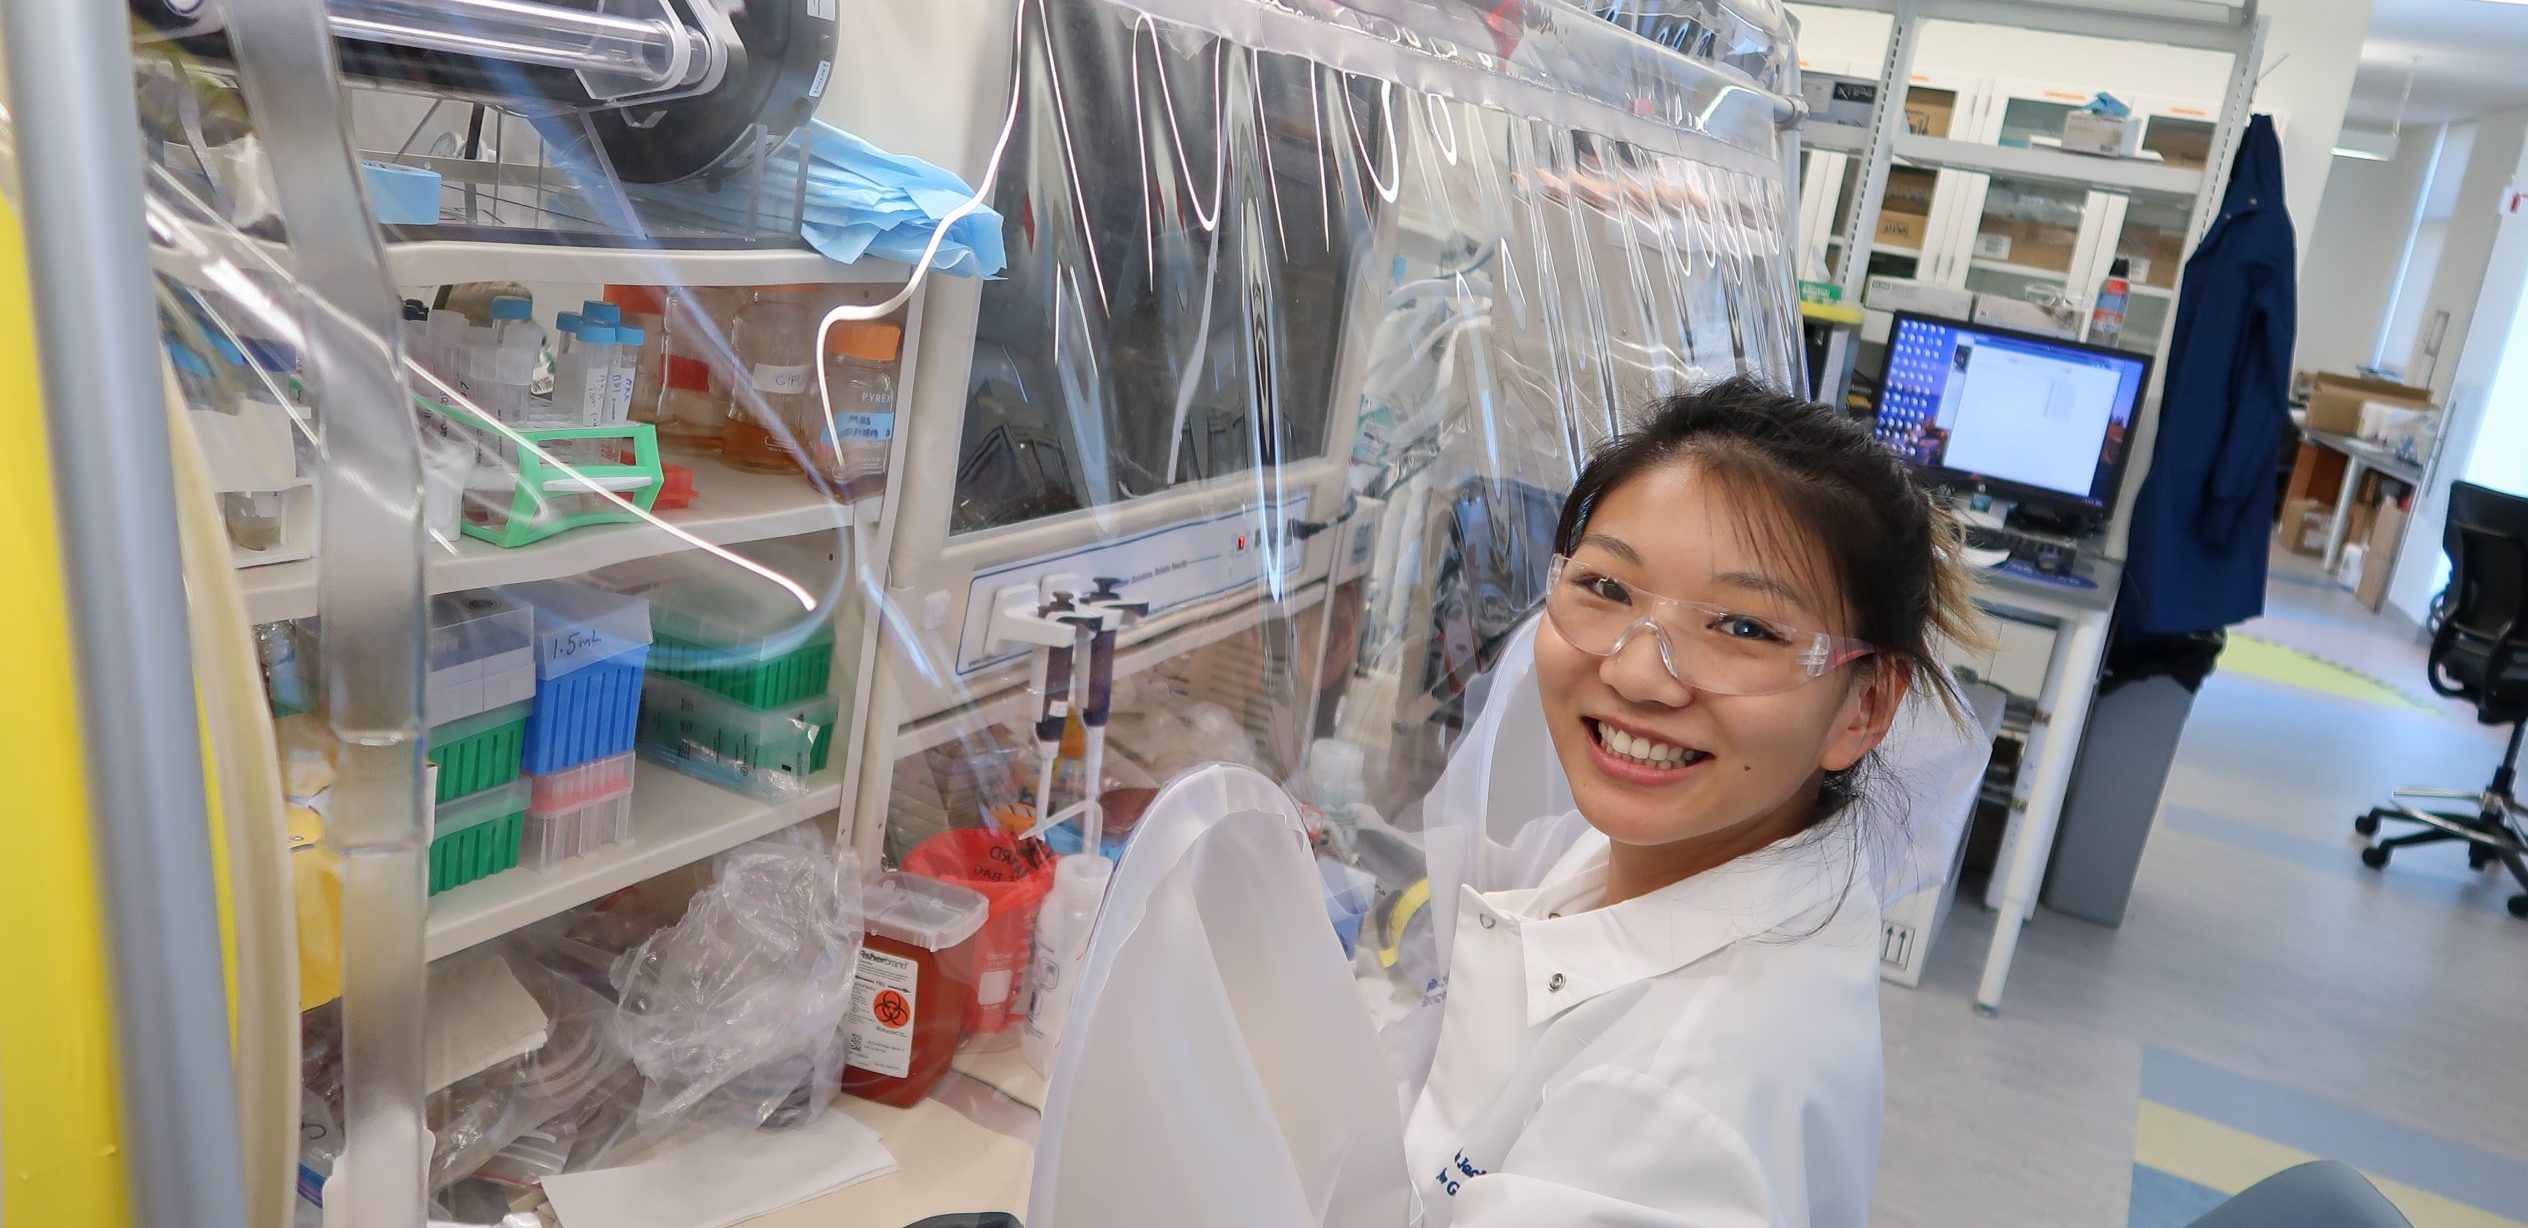 MD/PhD Candidate Jennifer Chung wearing lab coat and goggles in the Jackson Laboratory for Genomic Medicine smiling, working in an anaerobic chamber